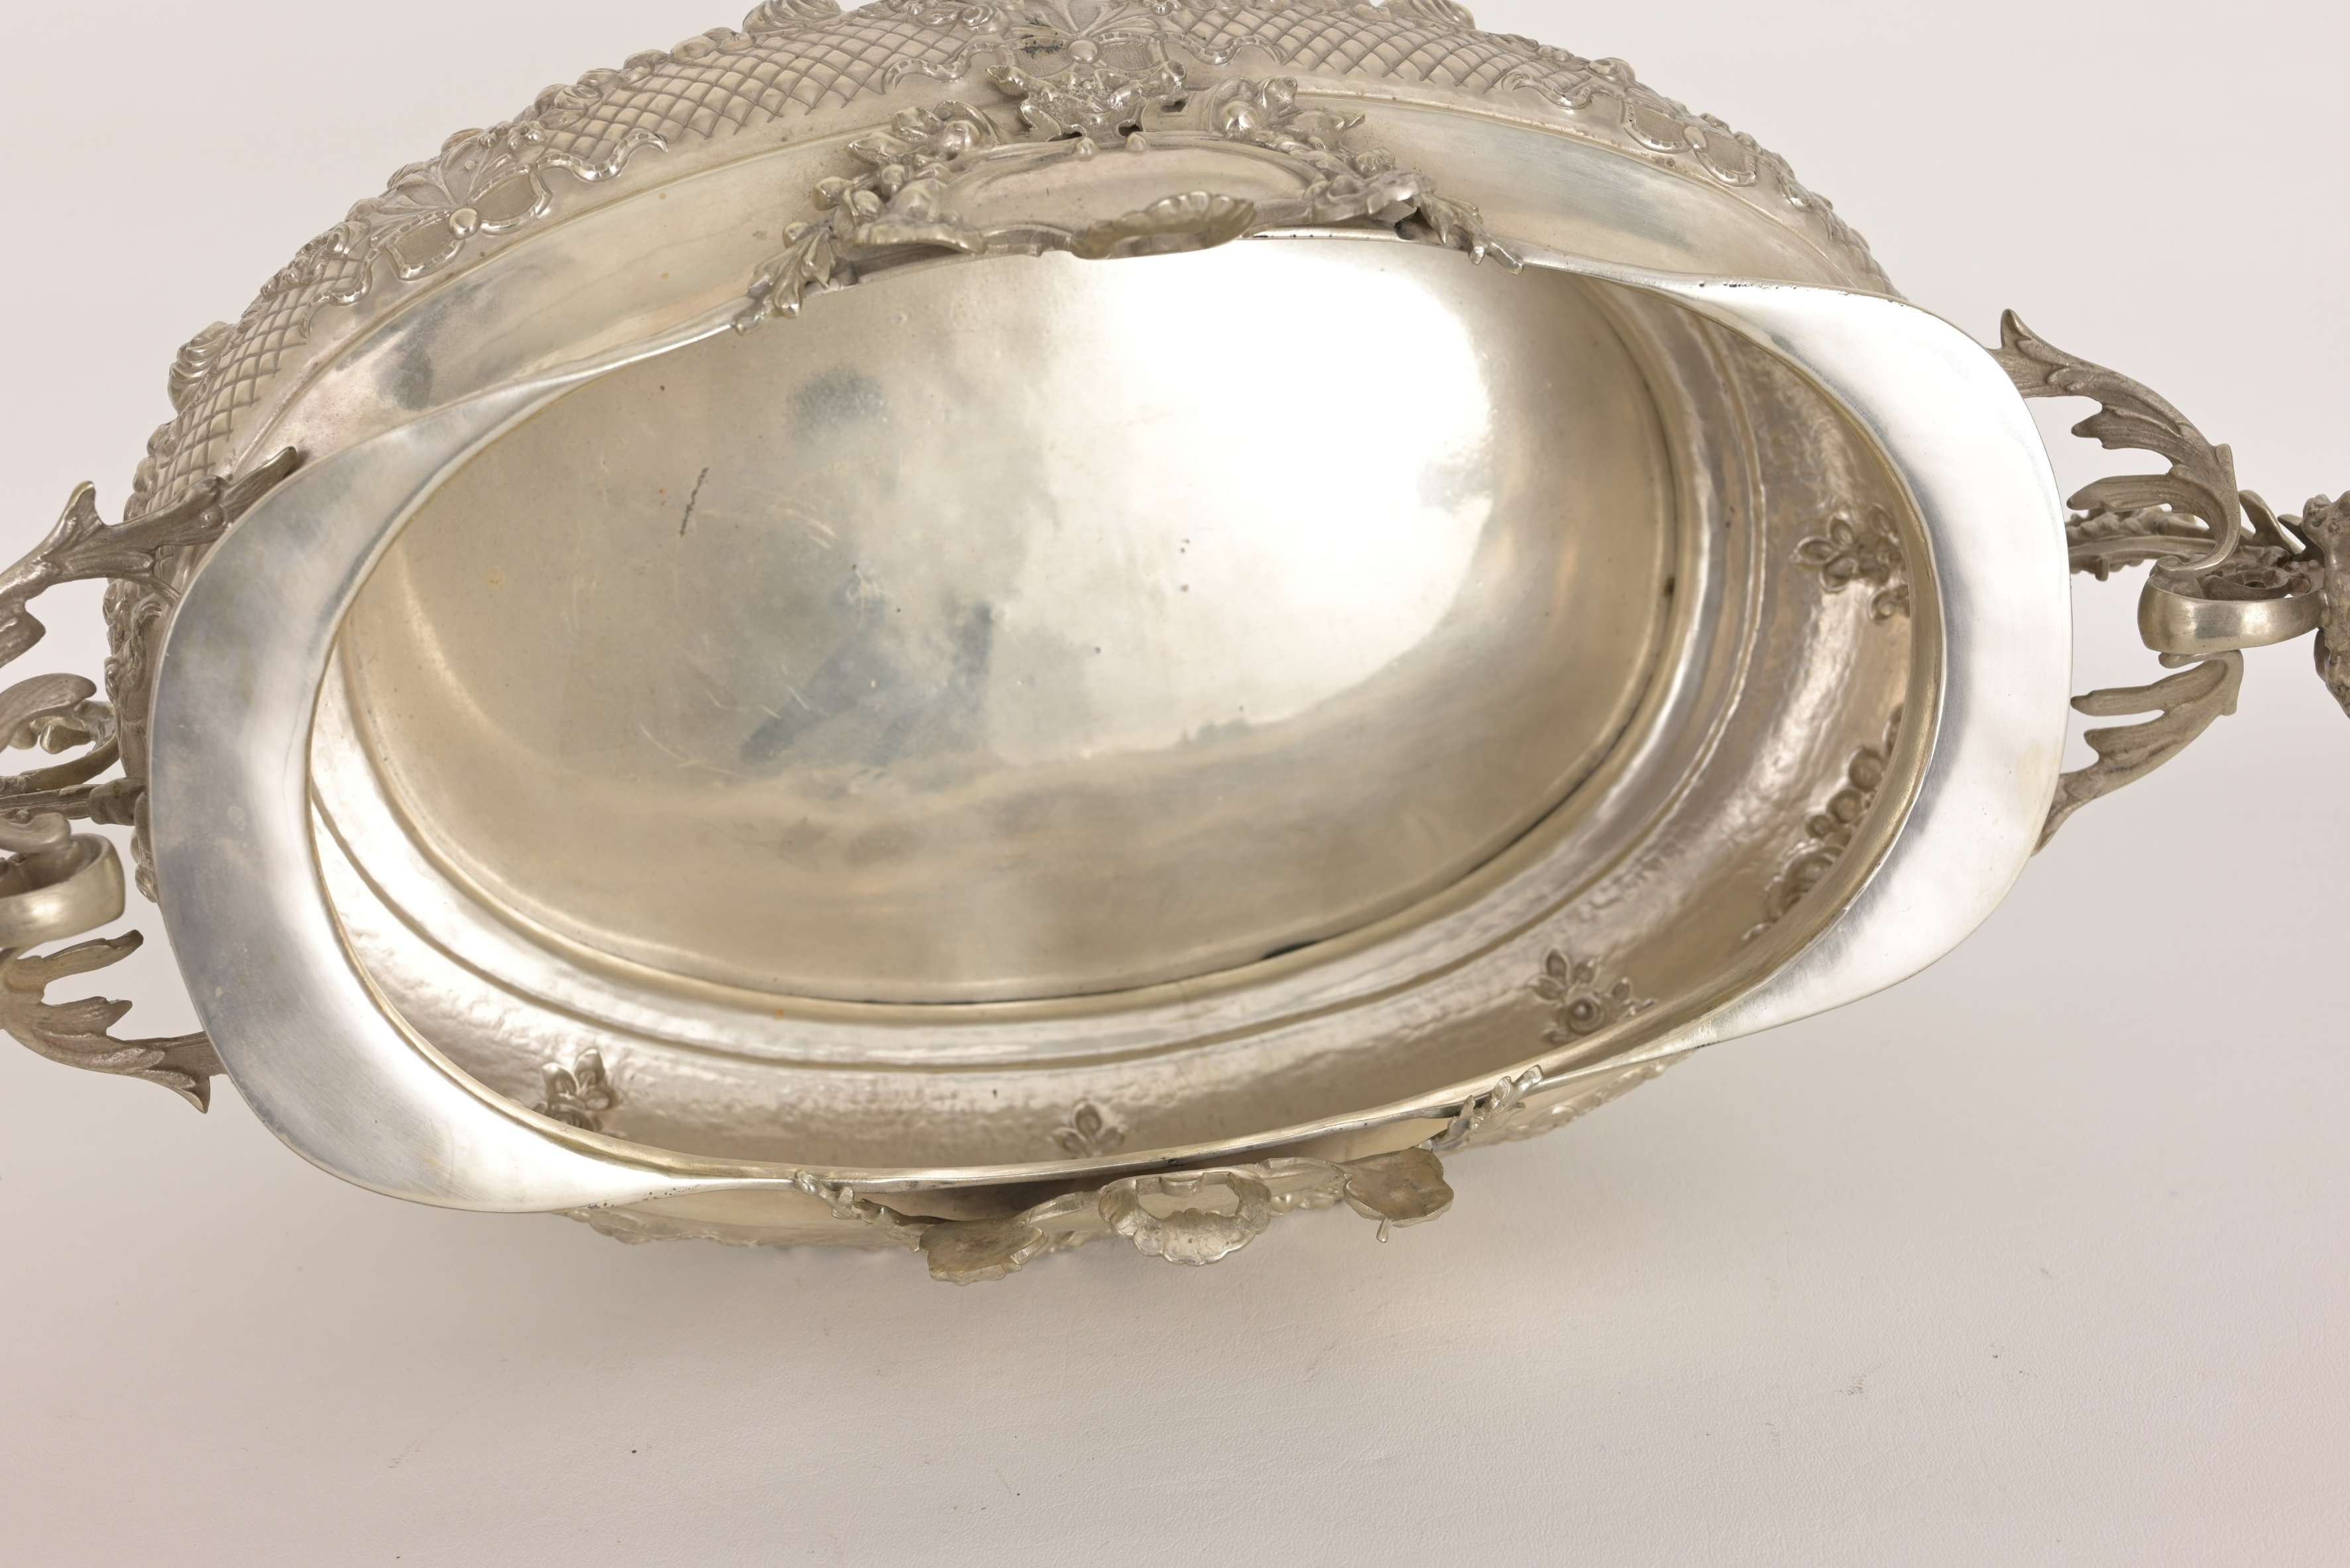 Large Parlayan .900 Silver Centerpiece - Image 7 of 10